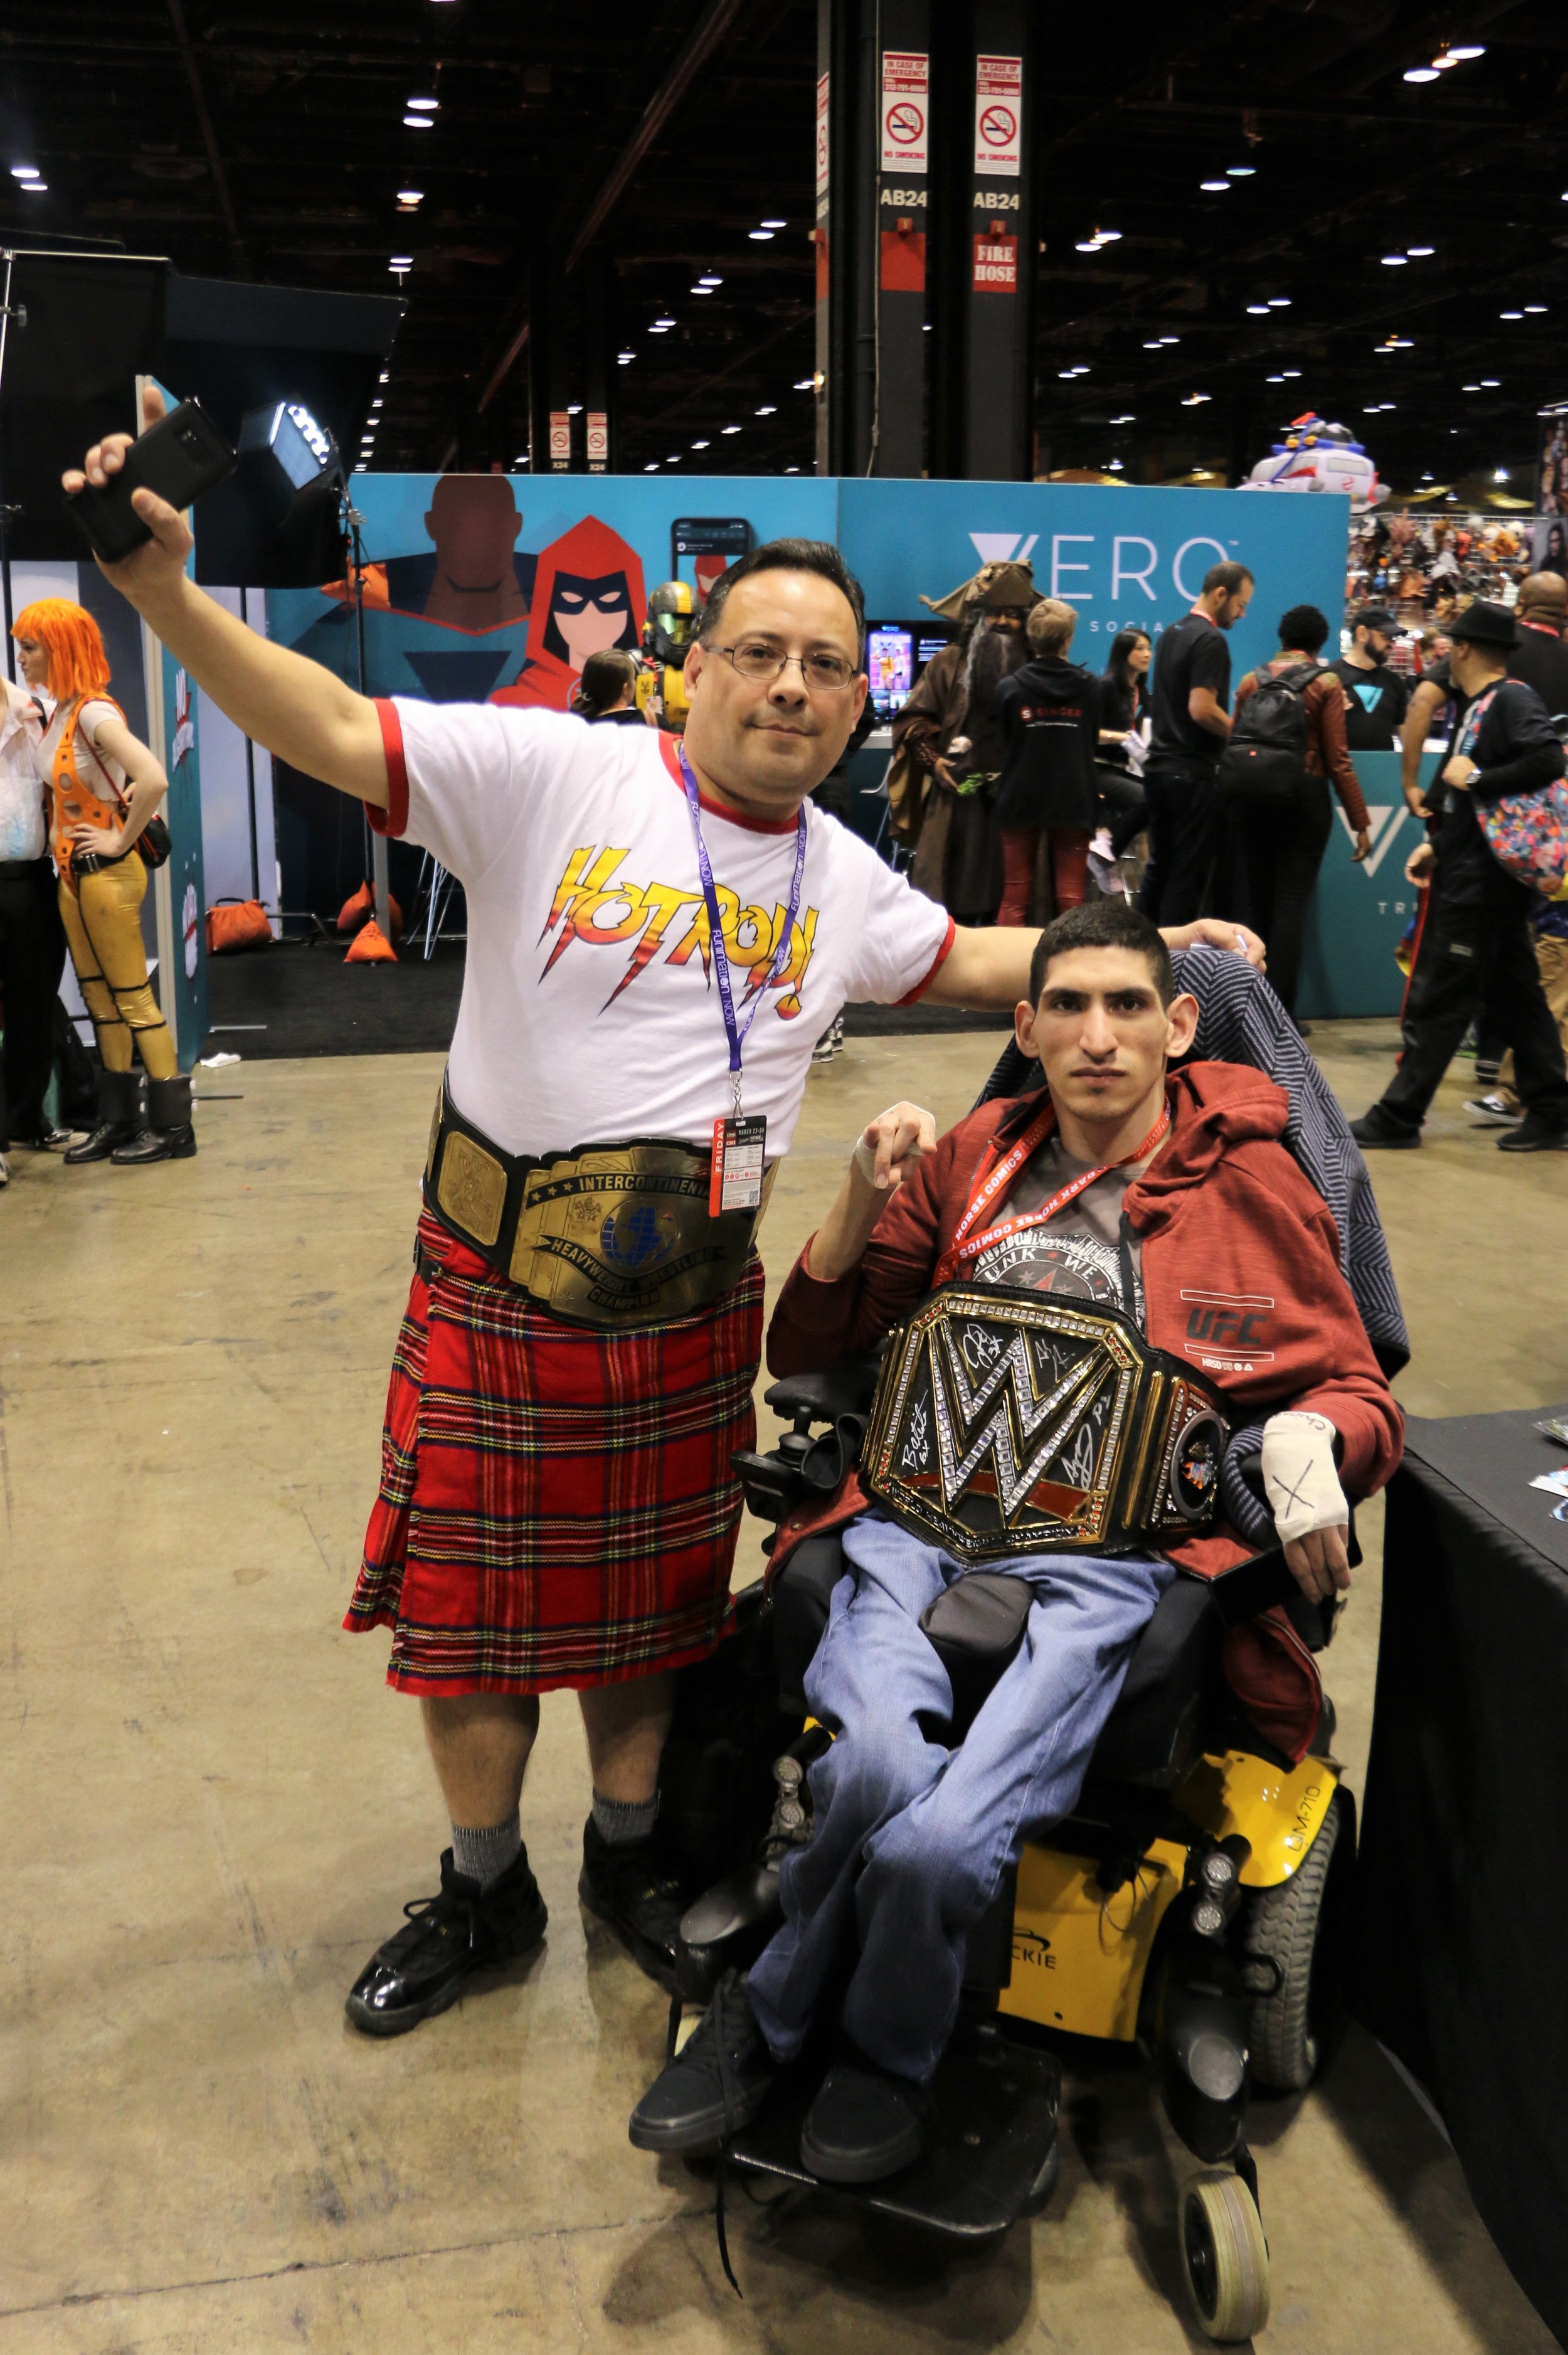  Rowdy Roddy Piper cosplayer poses with Too Sweet Cosplay admin Niko. 